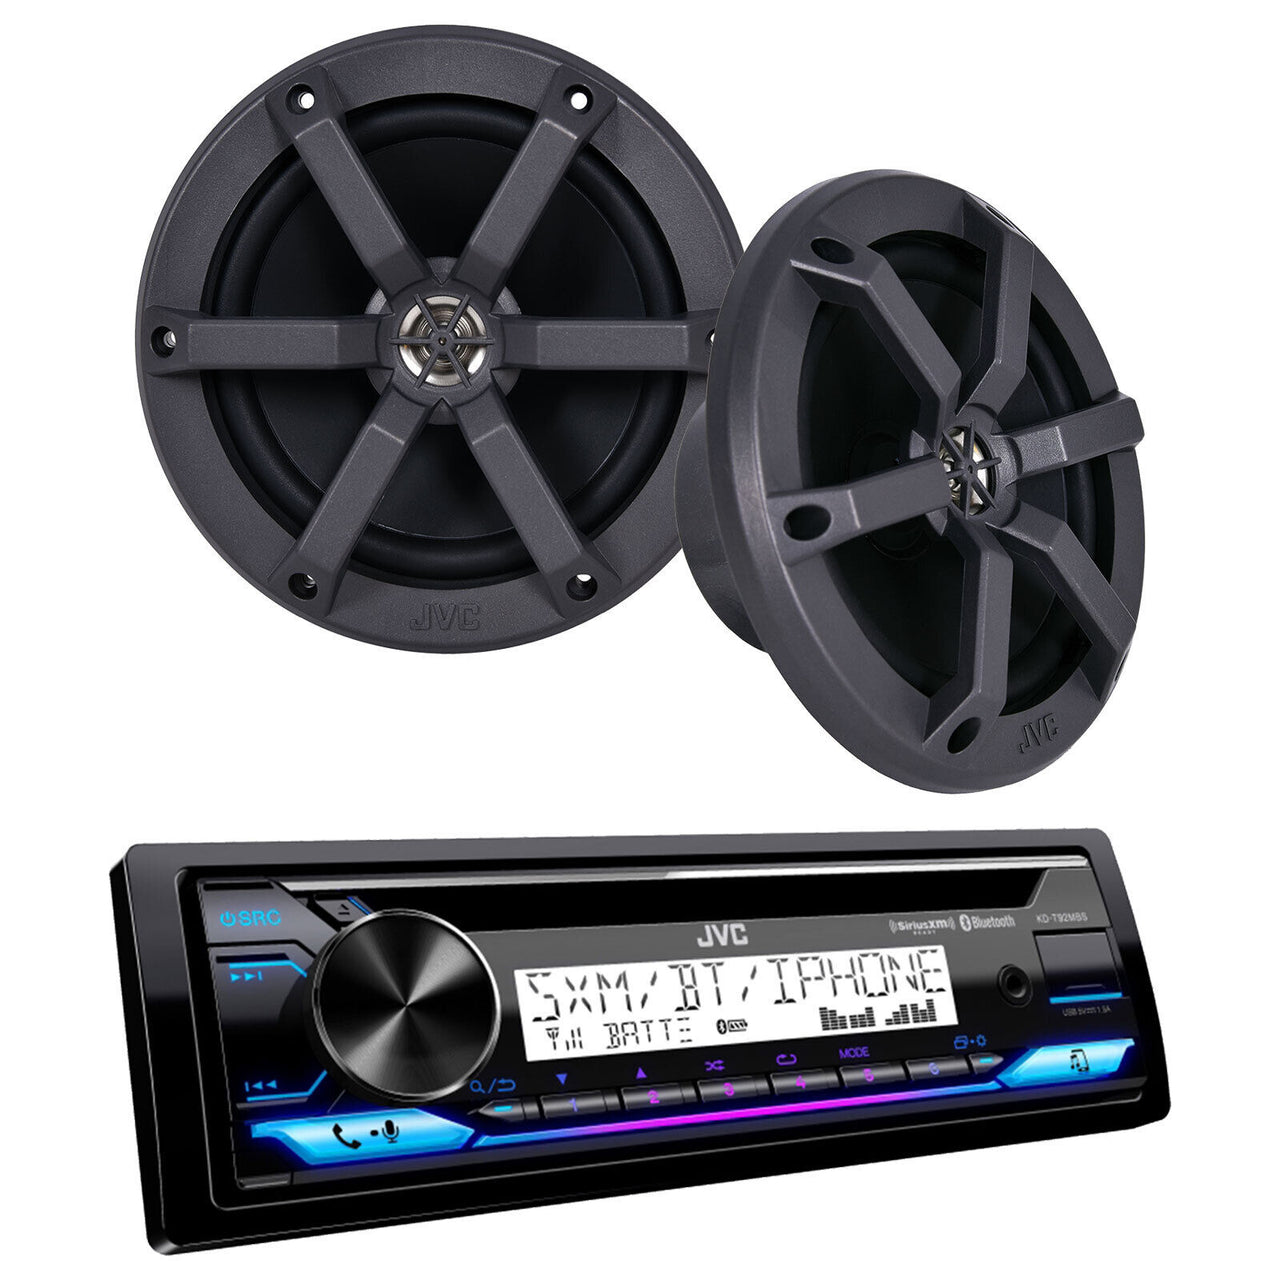 JVC KD-PKT92MBS JVC KD-T92MBS Single DIN CD Player Bluetooth USB AUX AM/FM Stereo Radio Receiver with 1 Pair of JVC CS-MS620 6.5" 2-Way 100 Watts Max Power Speakers - Marine/Motorsports Audio Package